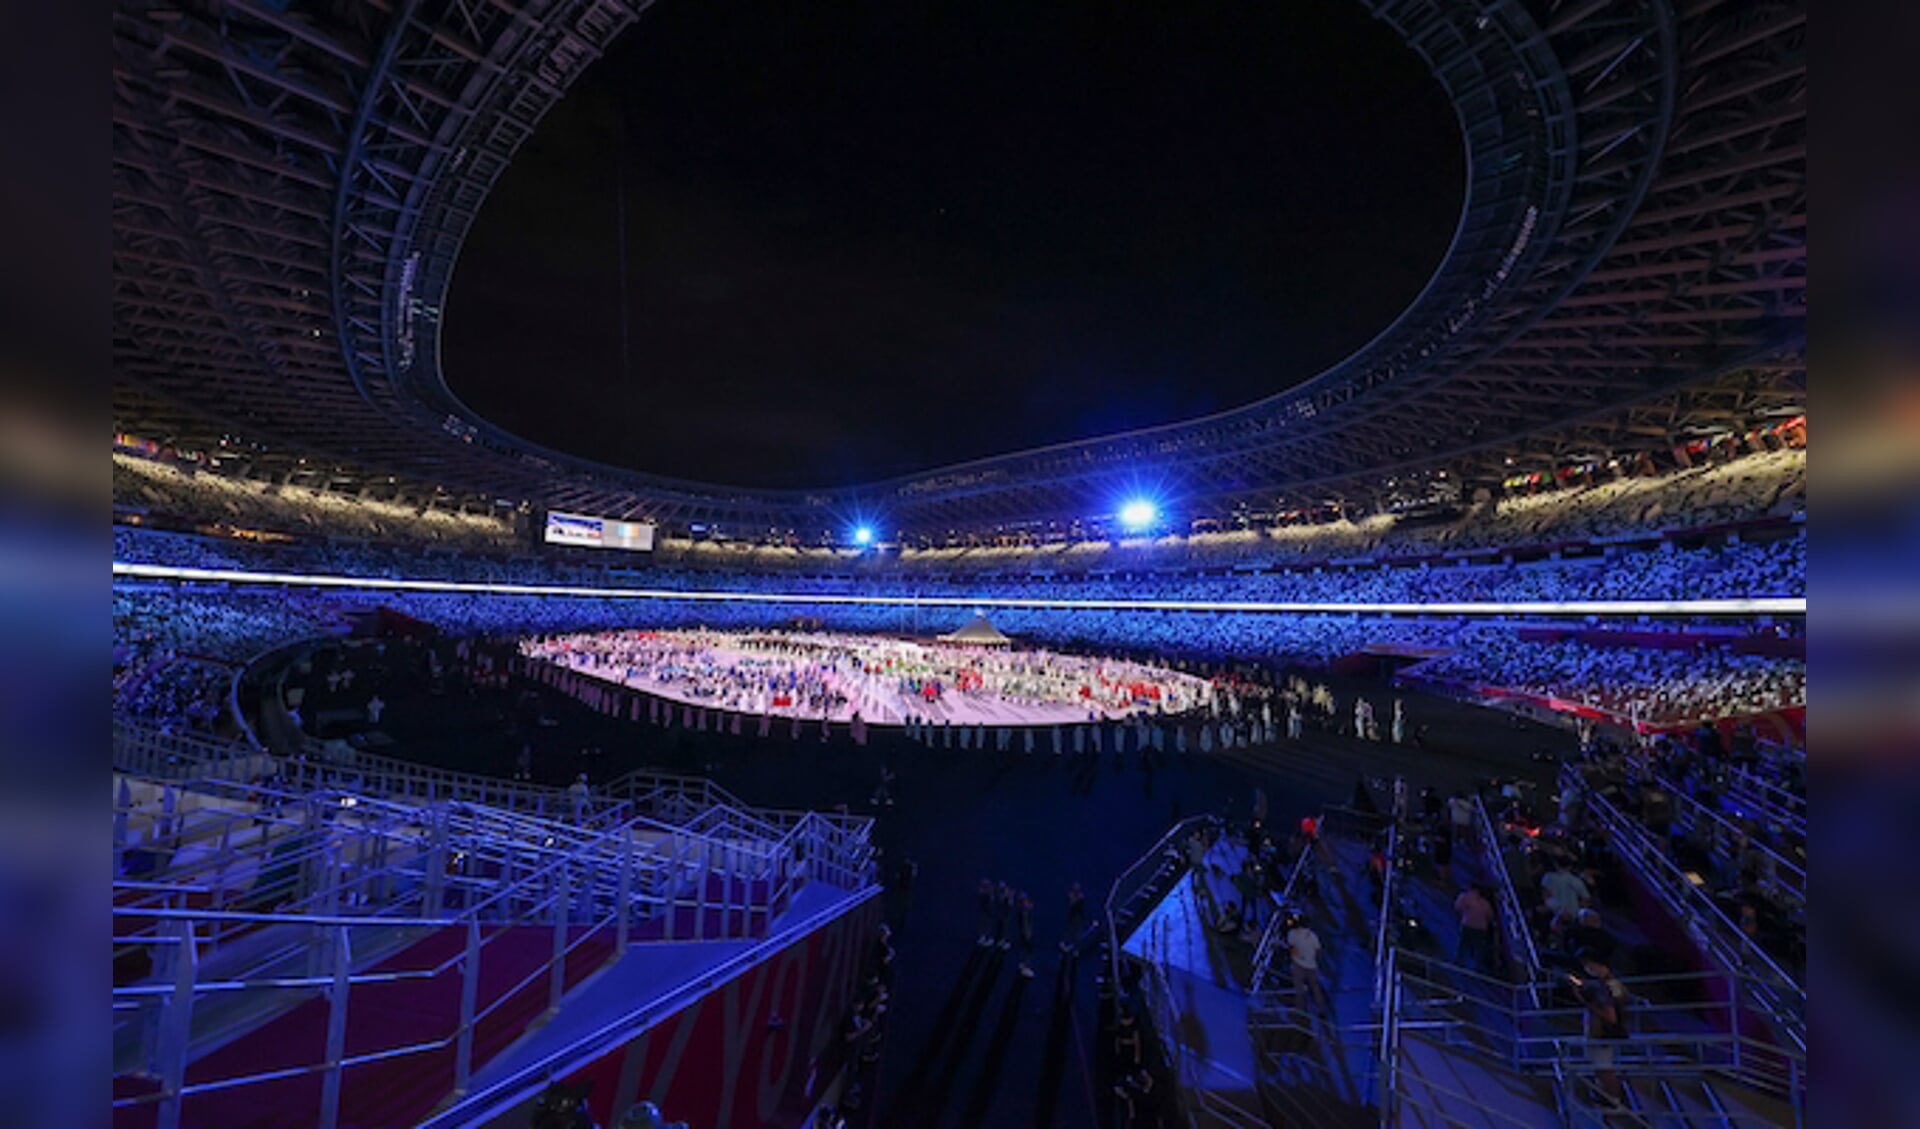 Opening Ceremony
Olympic Games Tokyo 2021
© Hippo Foto - Dirk Caremans
23/07/2021